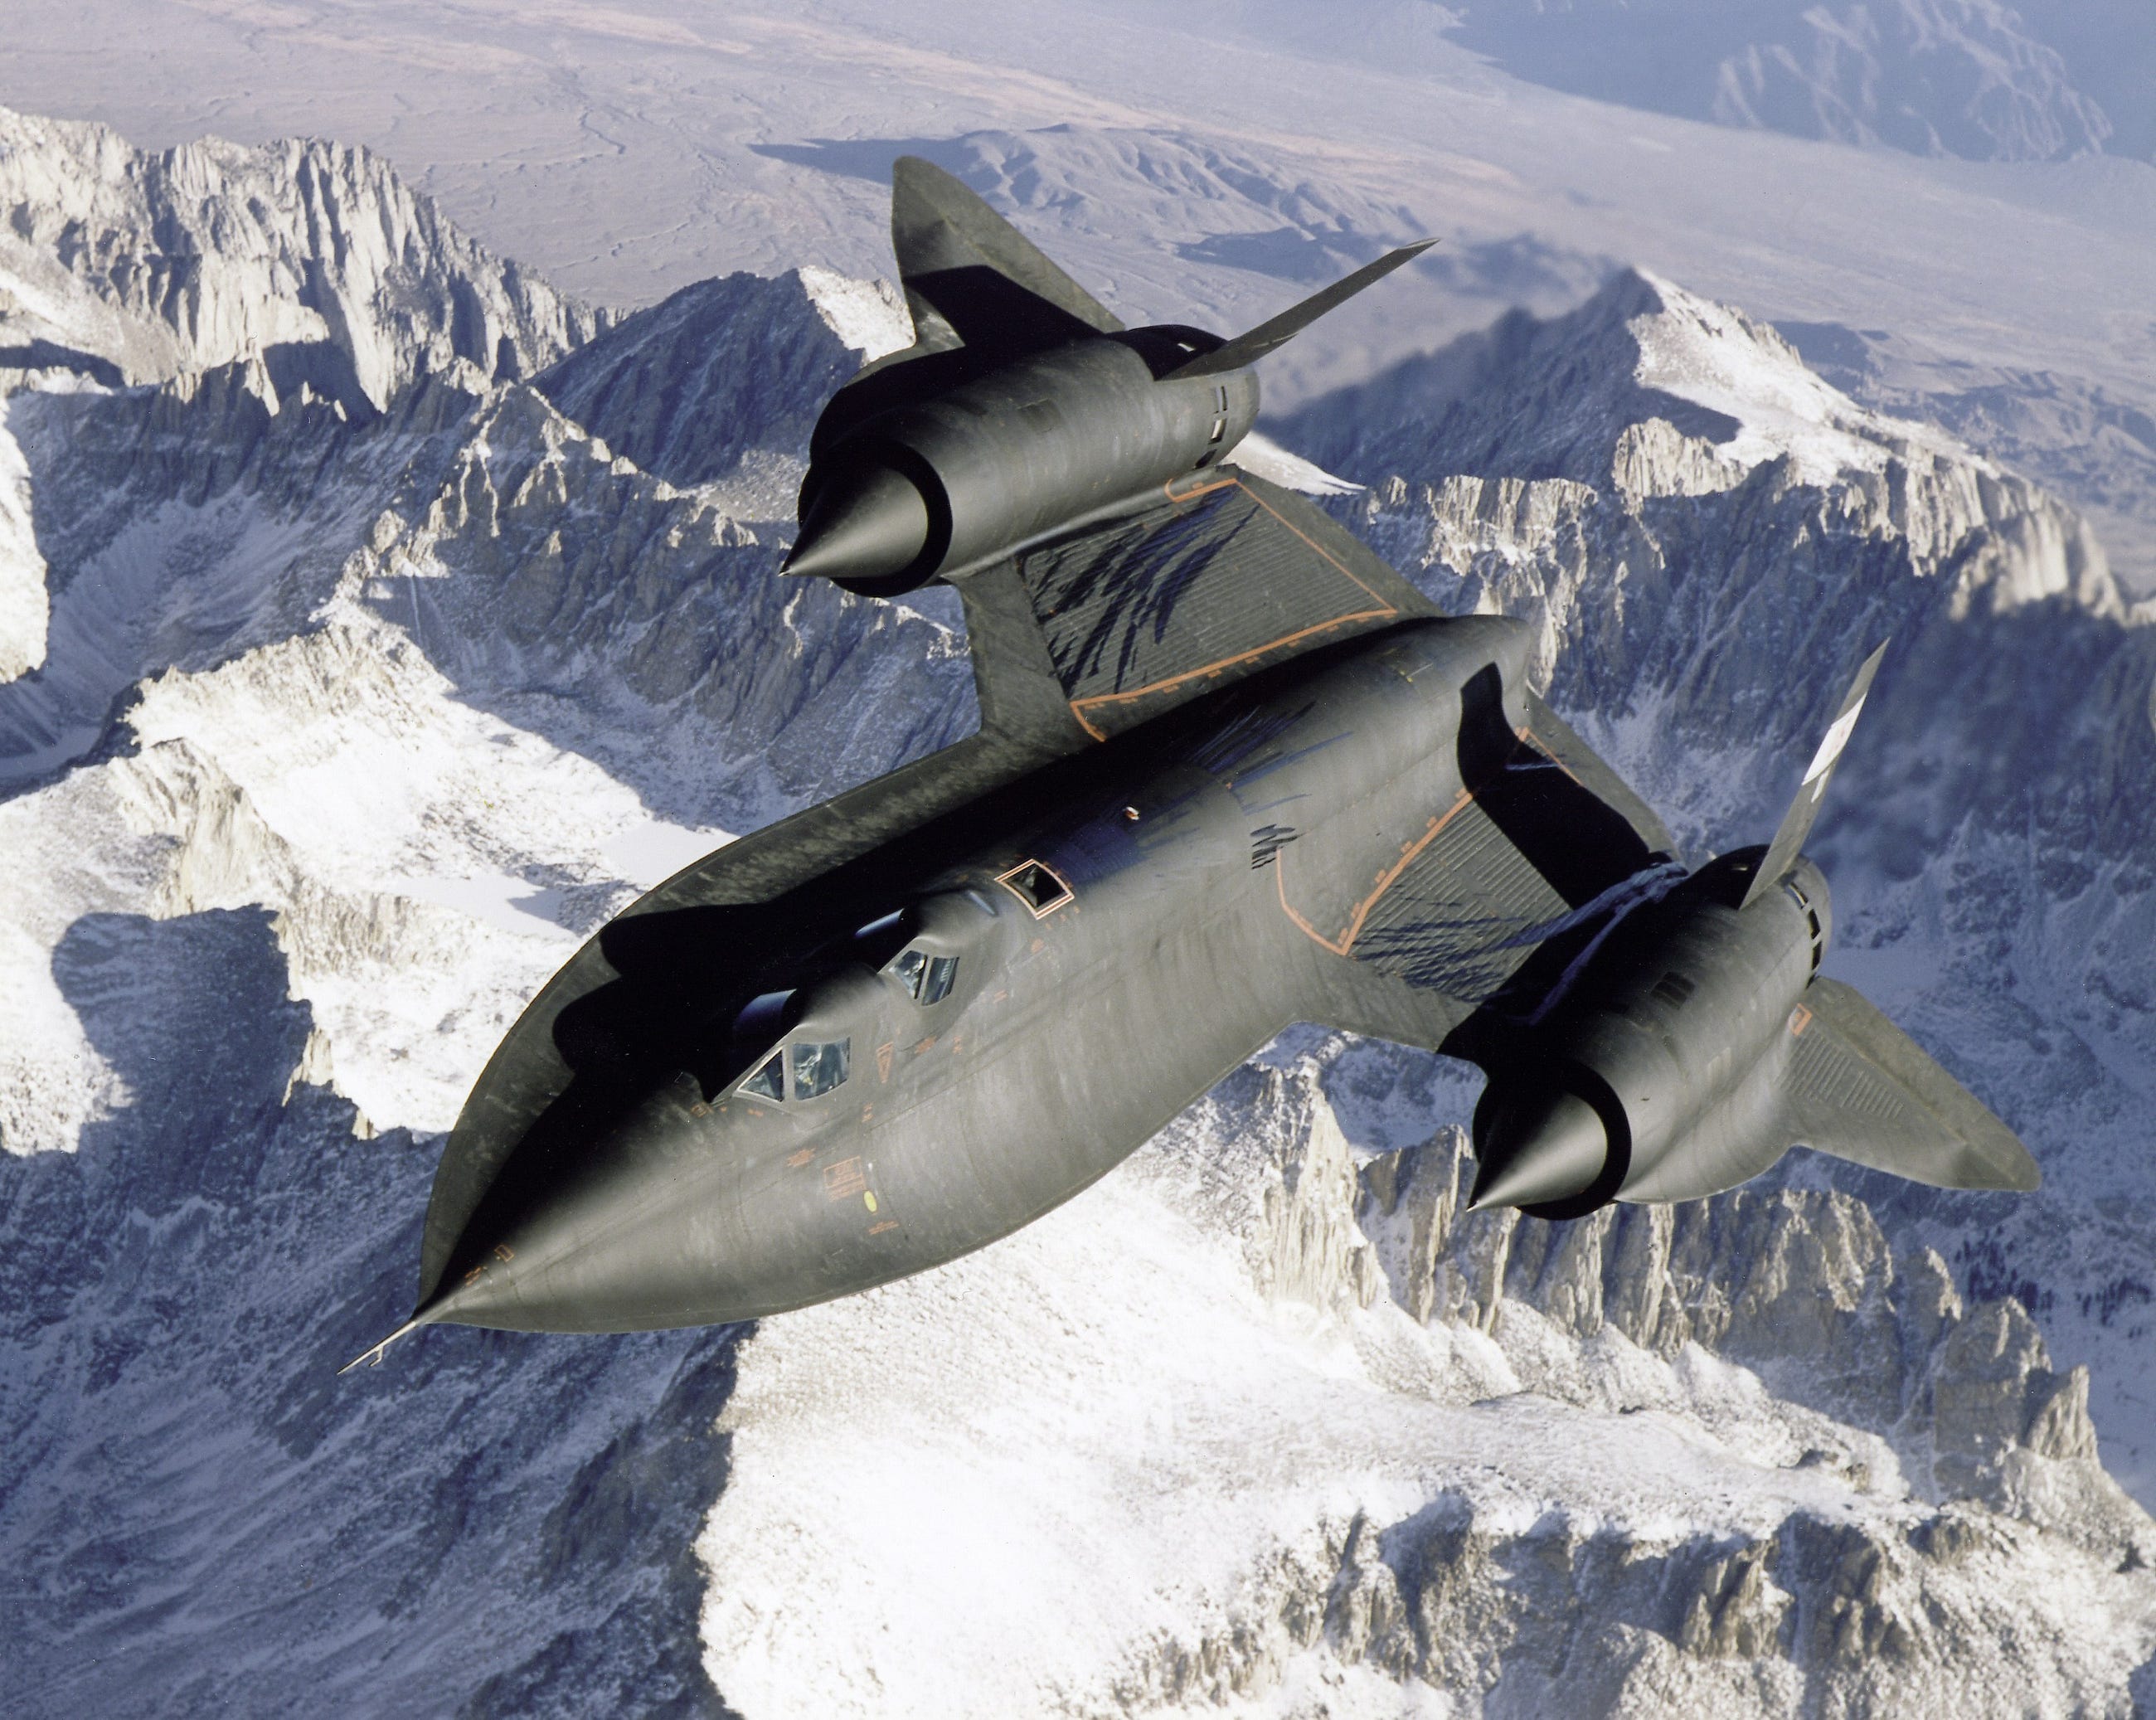 Lockheed Martin’s Skunk Works: A Model for Advanced R&D Projects